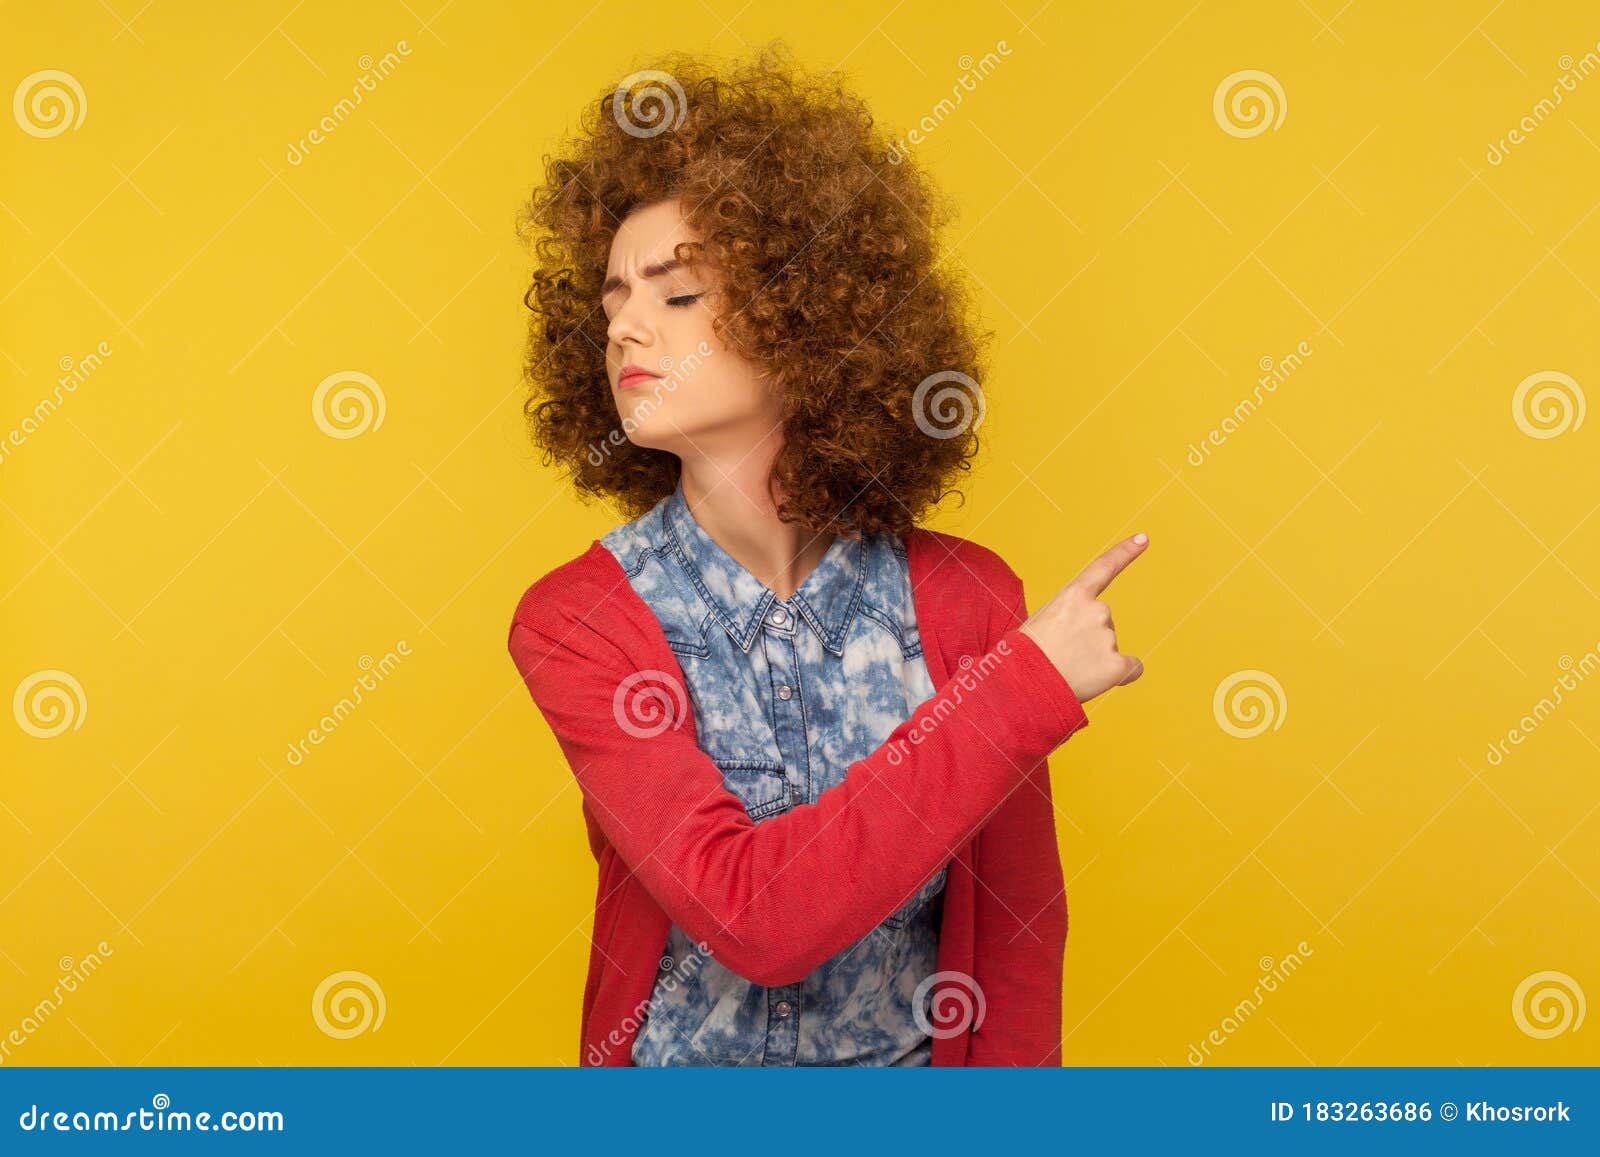 Get Out! Portrait of Upset Vexed Woman with Curly Hair Showing Exit ...